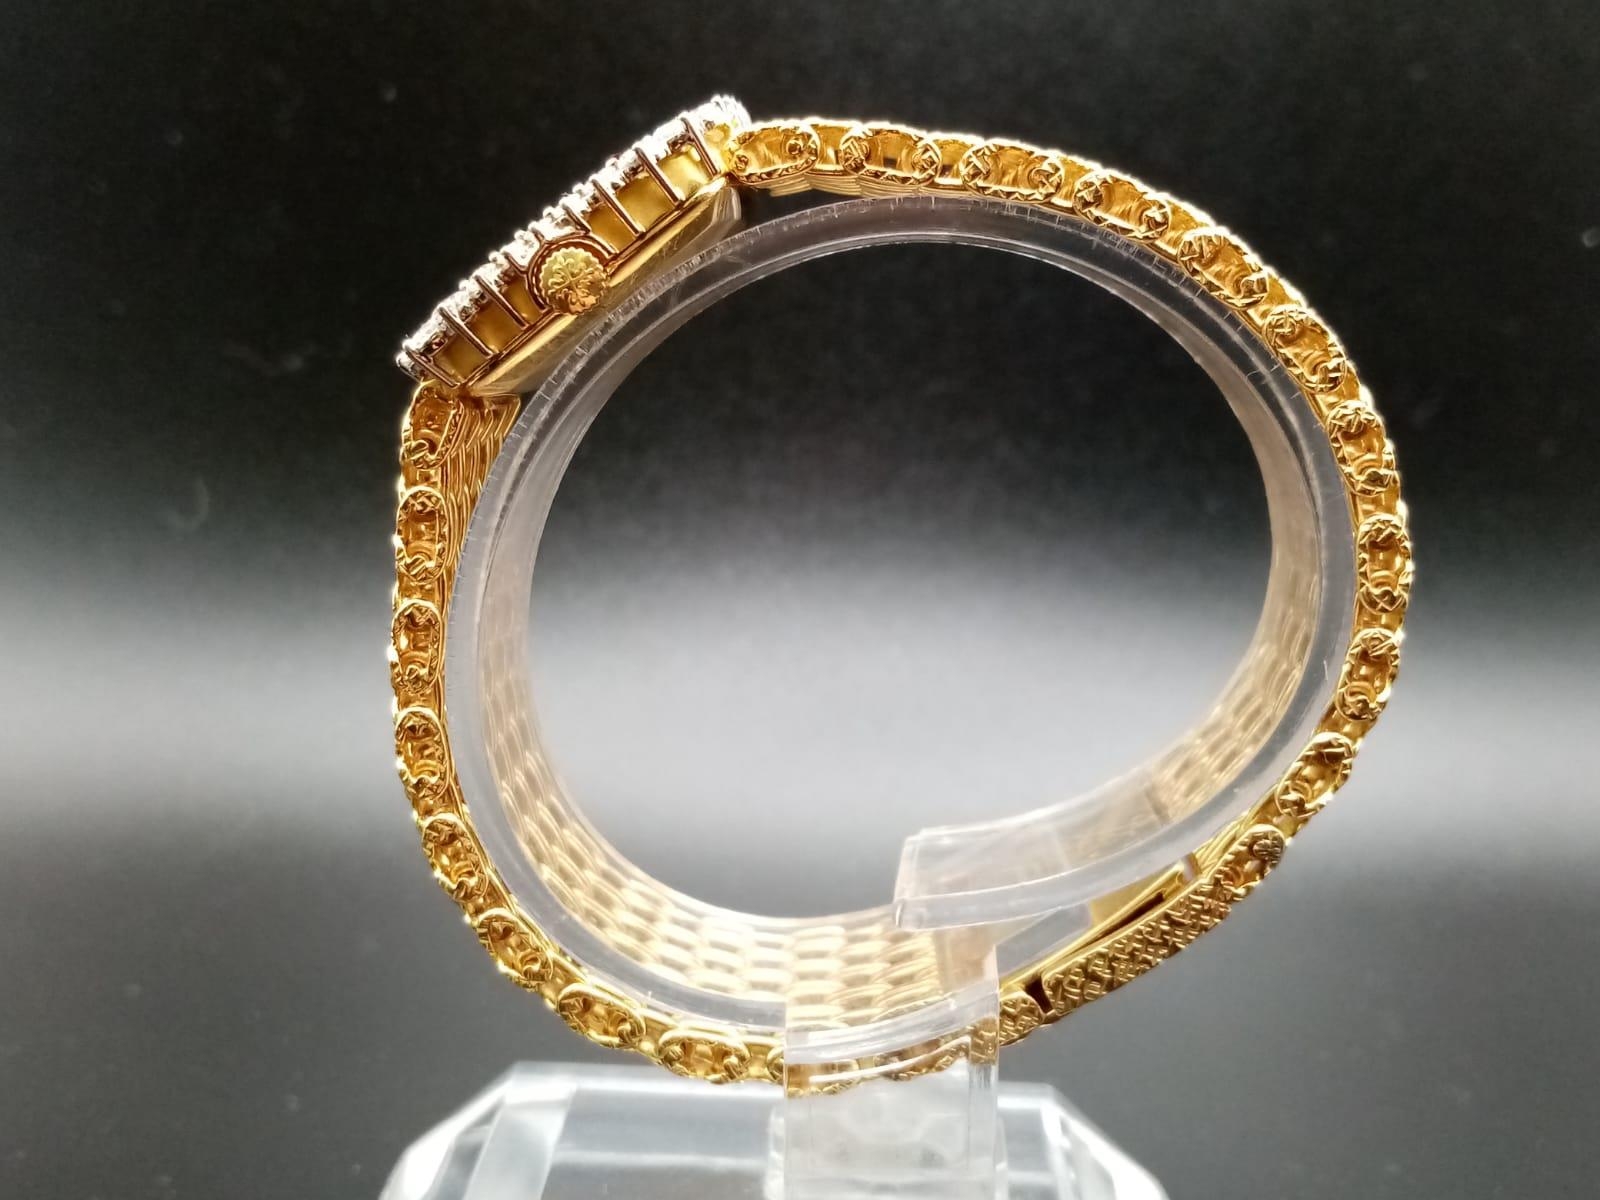 A Patek Phillipe Classic 18K Gold and Diamond Ladies Watch. Woven gold bracelet. Gold case - 24mm. - Image 3 of 11